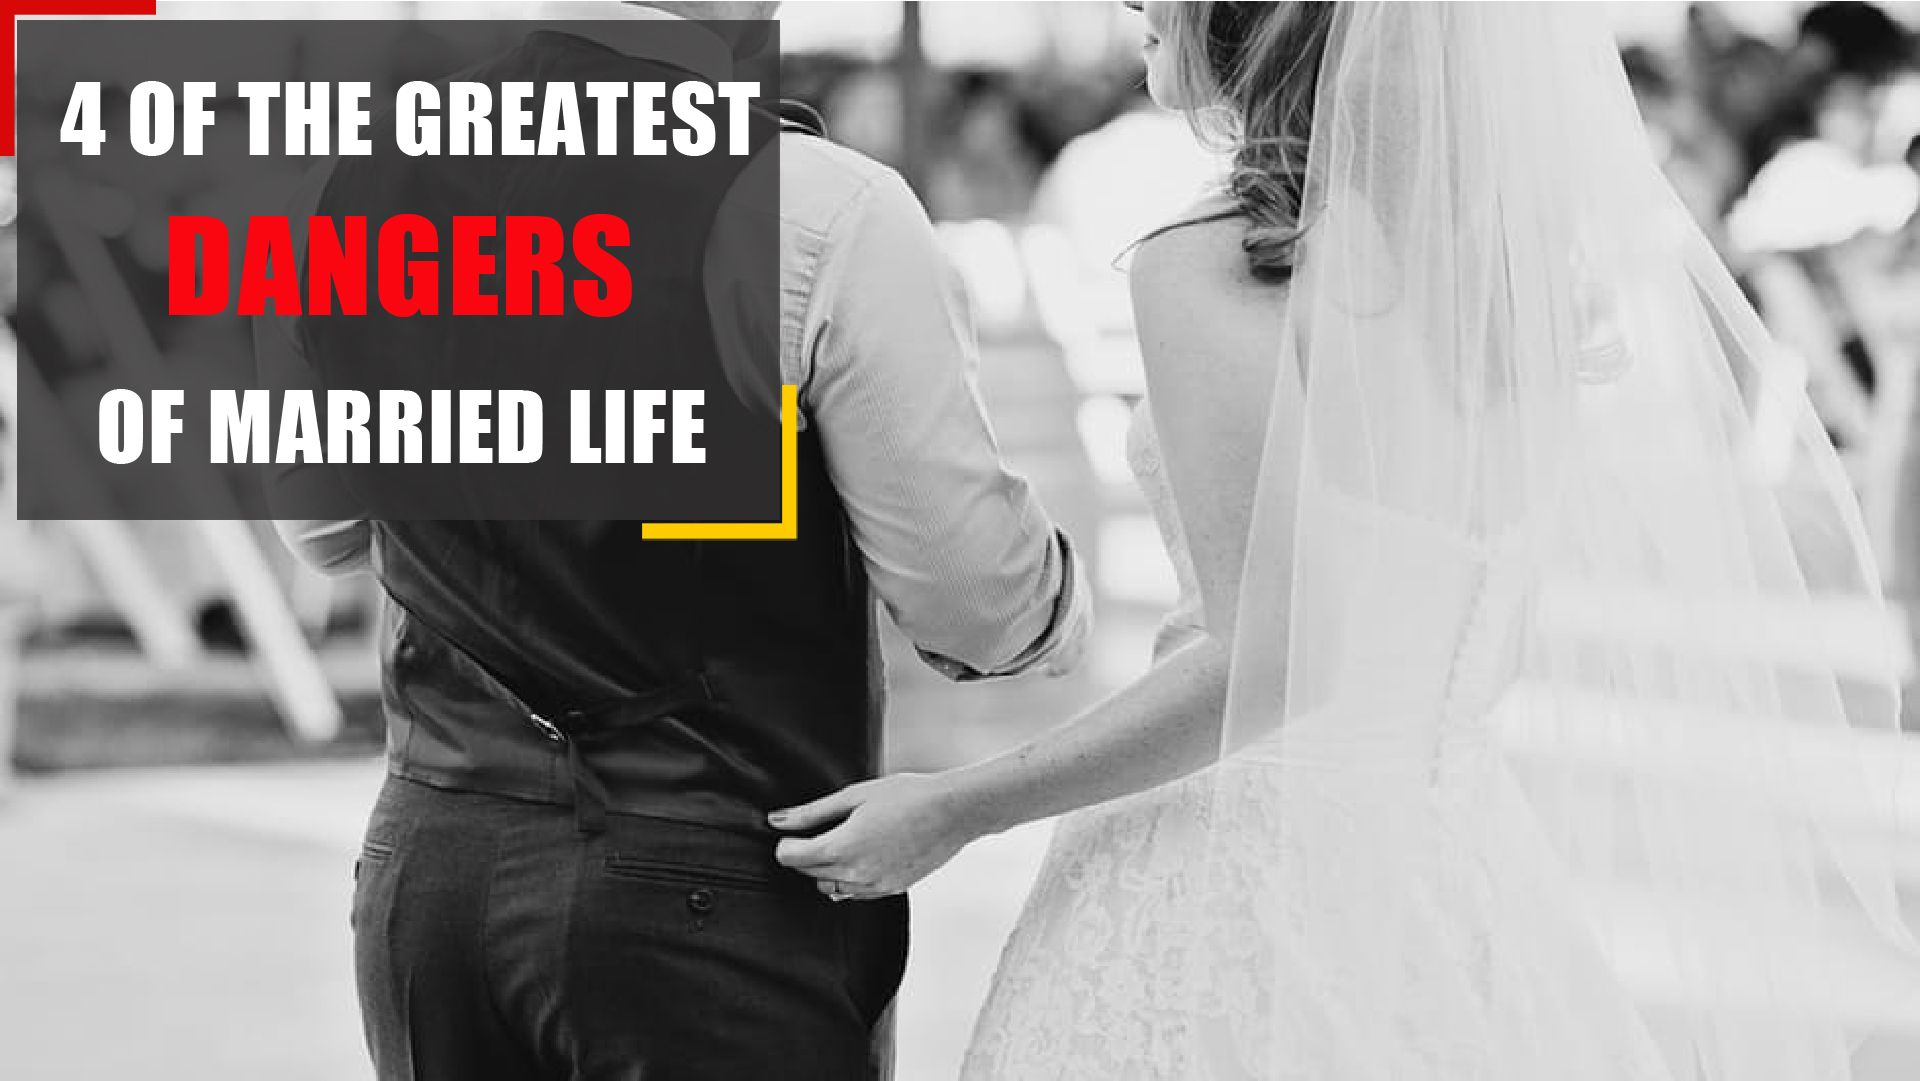 4 of the greatest dangers of married life